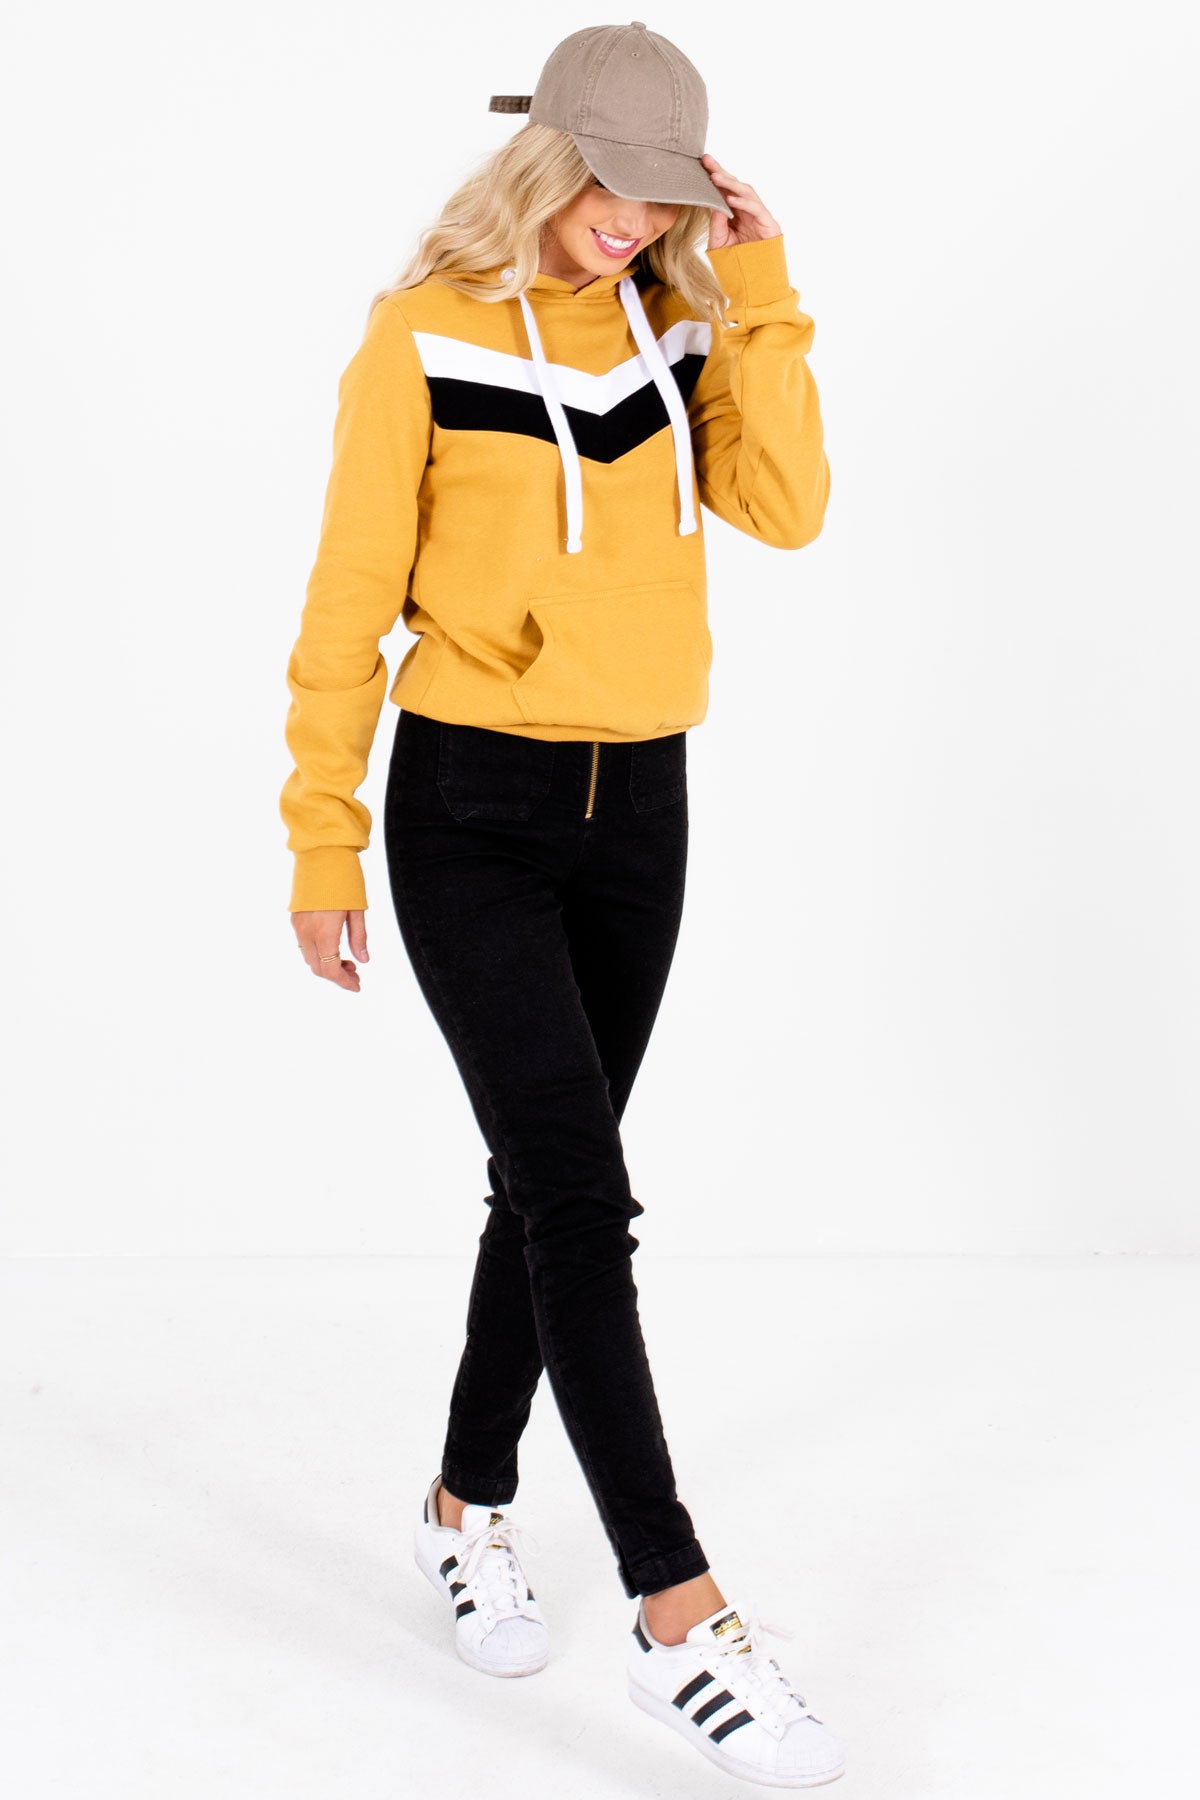 Women’s Mustard Yellow Warm and Cozy Boutique Outerwear